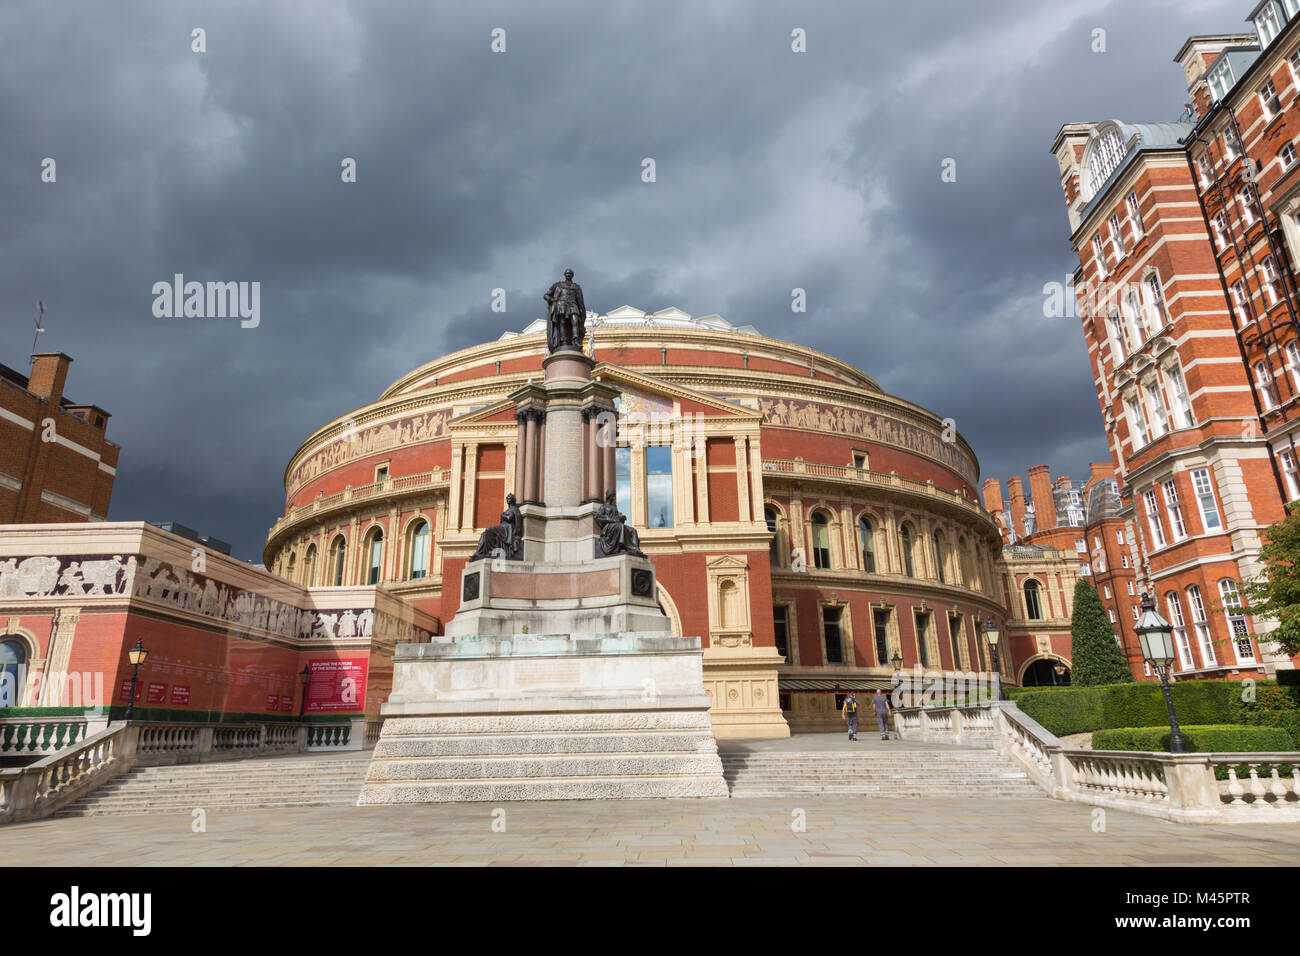 London - The Albert hall and The Memorial to the Great Exhibition by John Durham from year 1851. Stock Photo